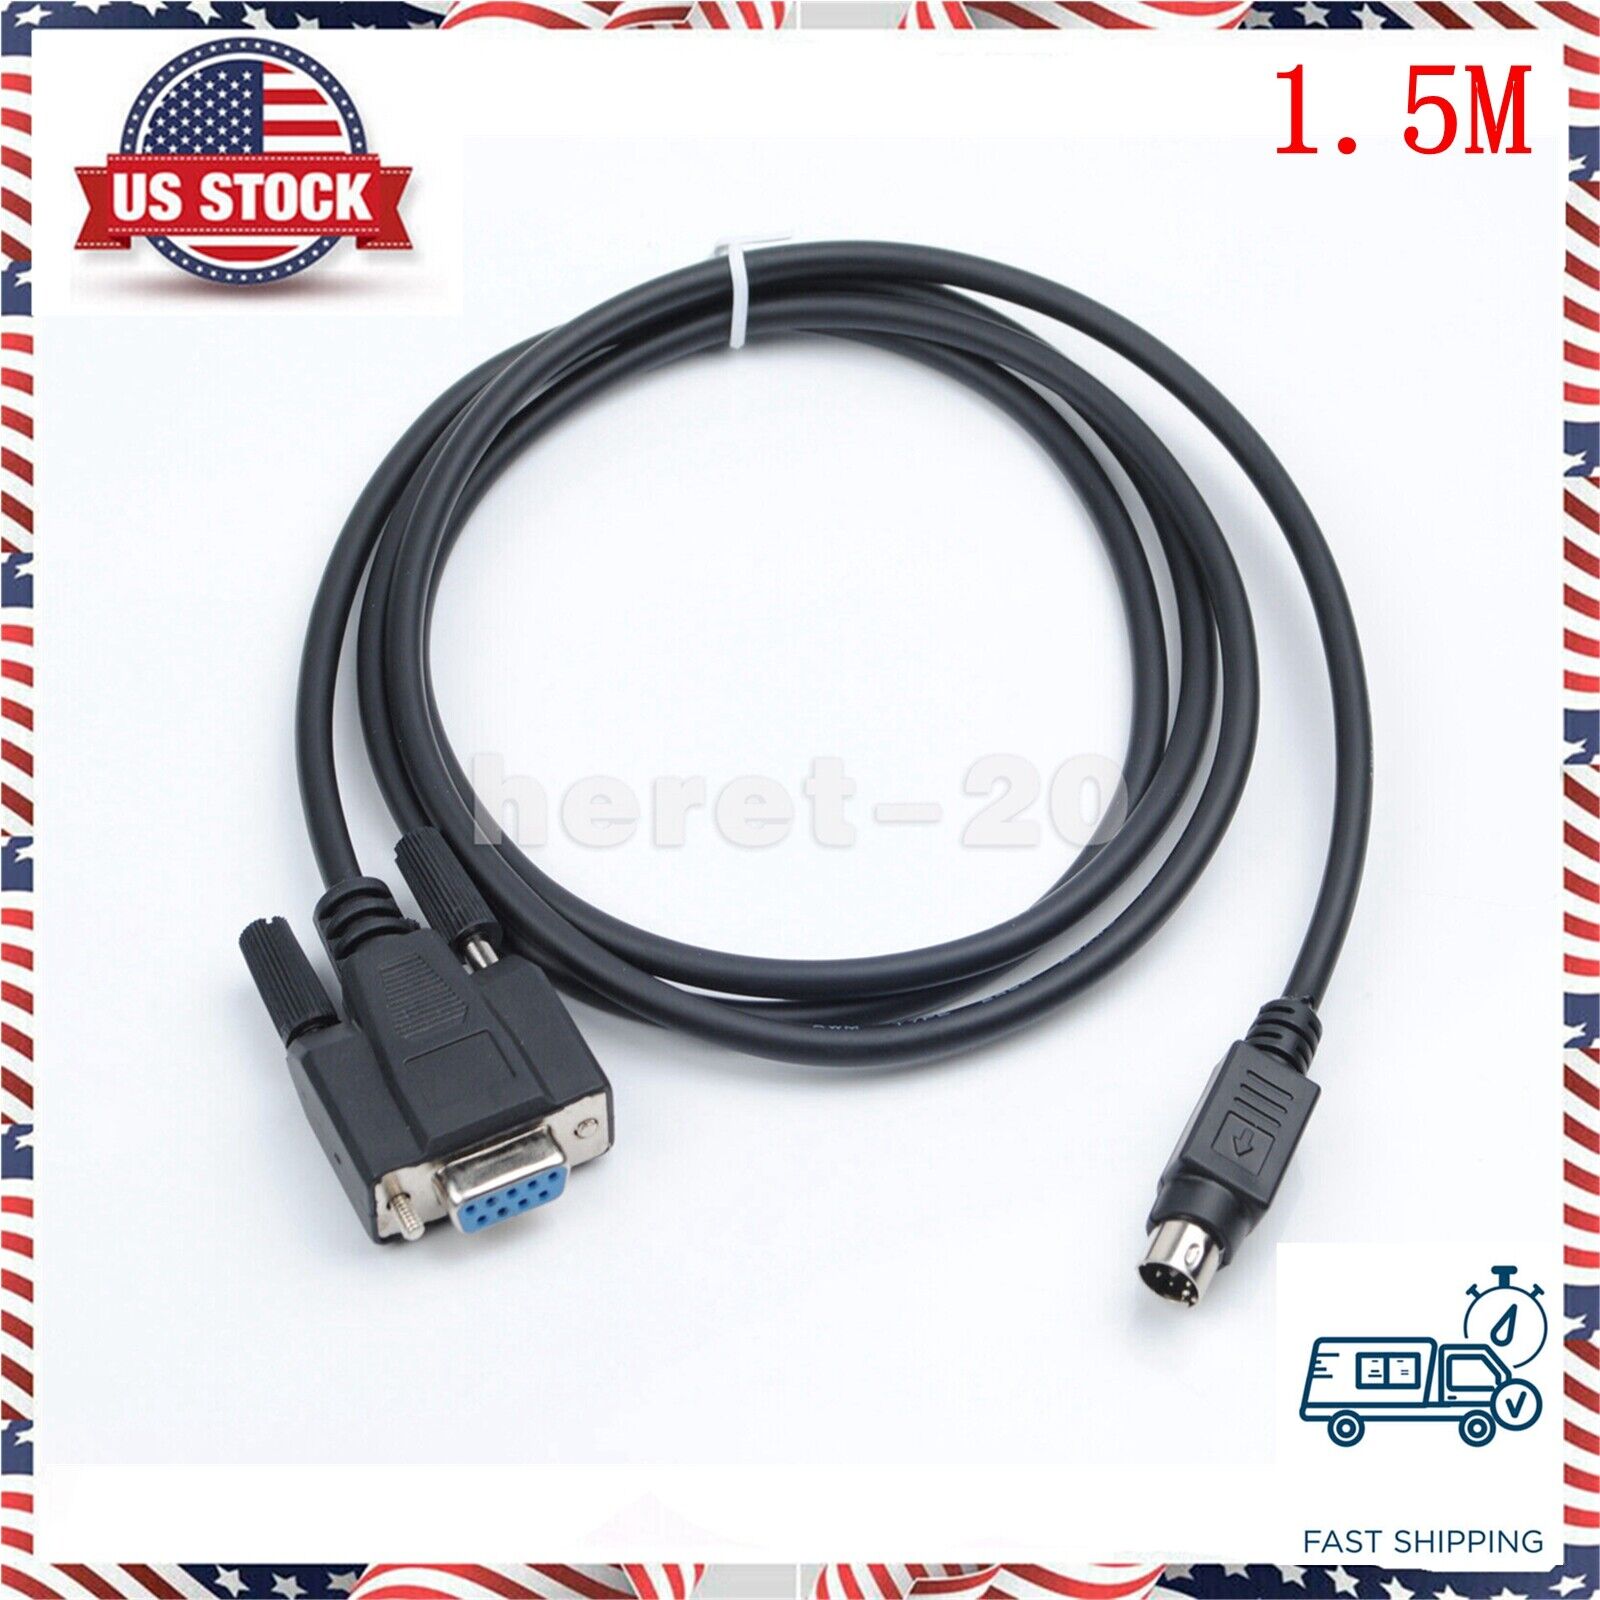 NEW Password Reset/Service Cable FOR DELL MD3600f MD3000I MD3260F MD366OF MD3220